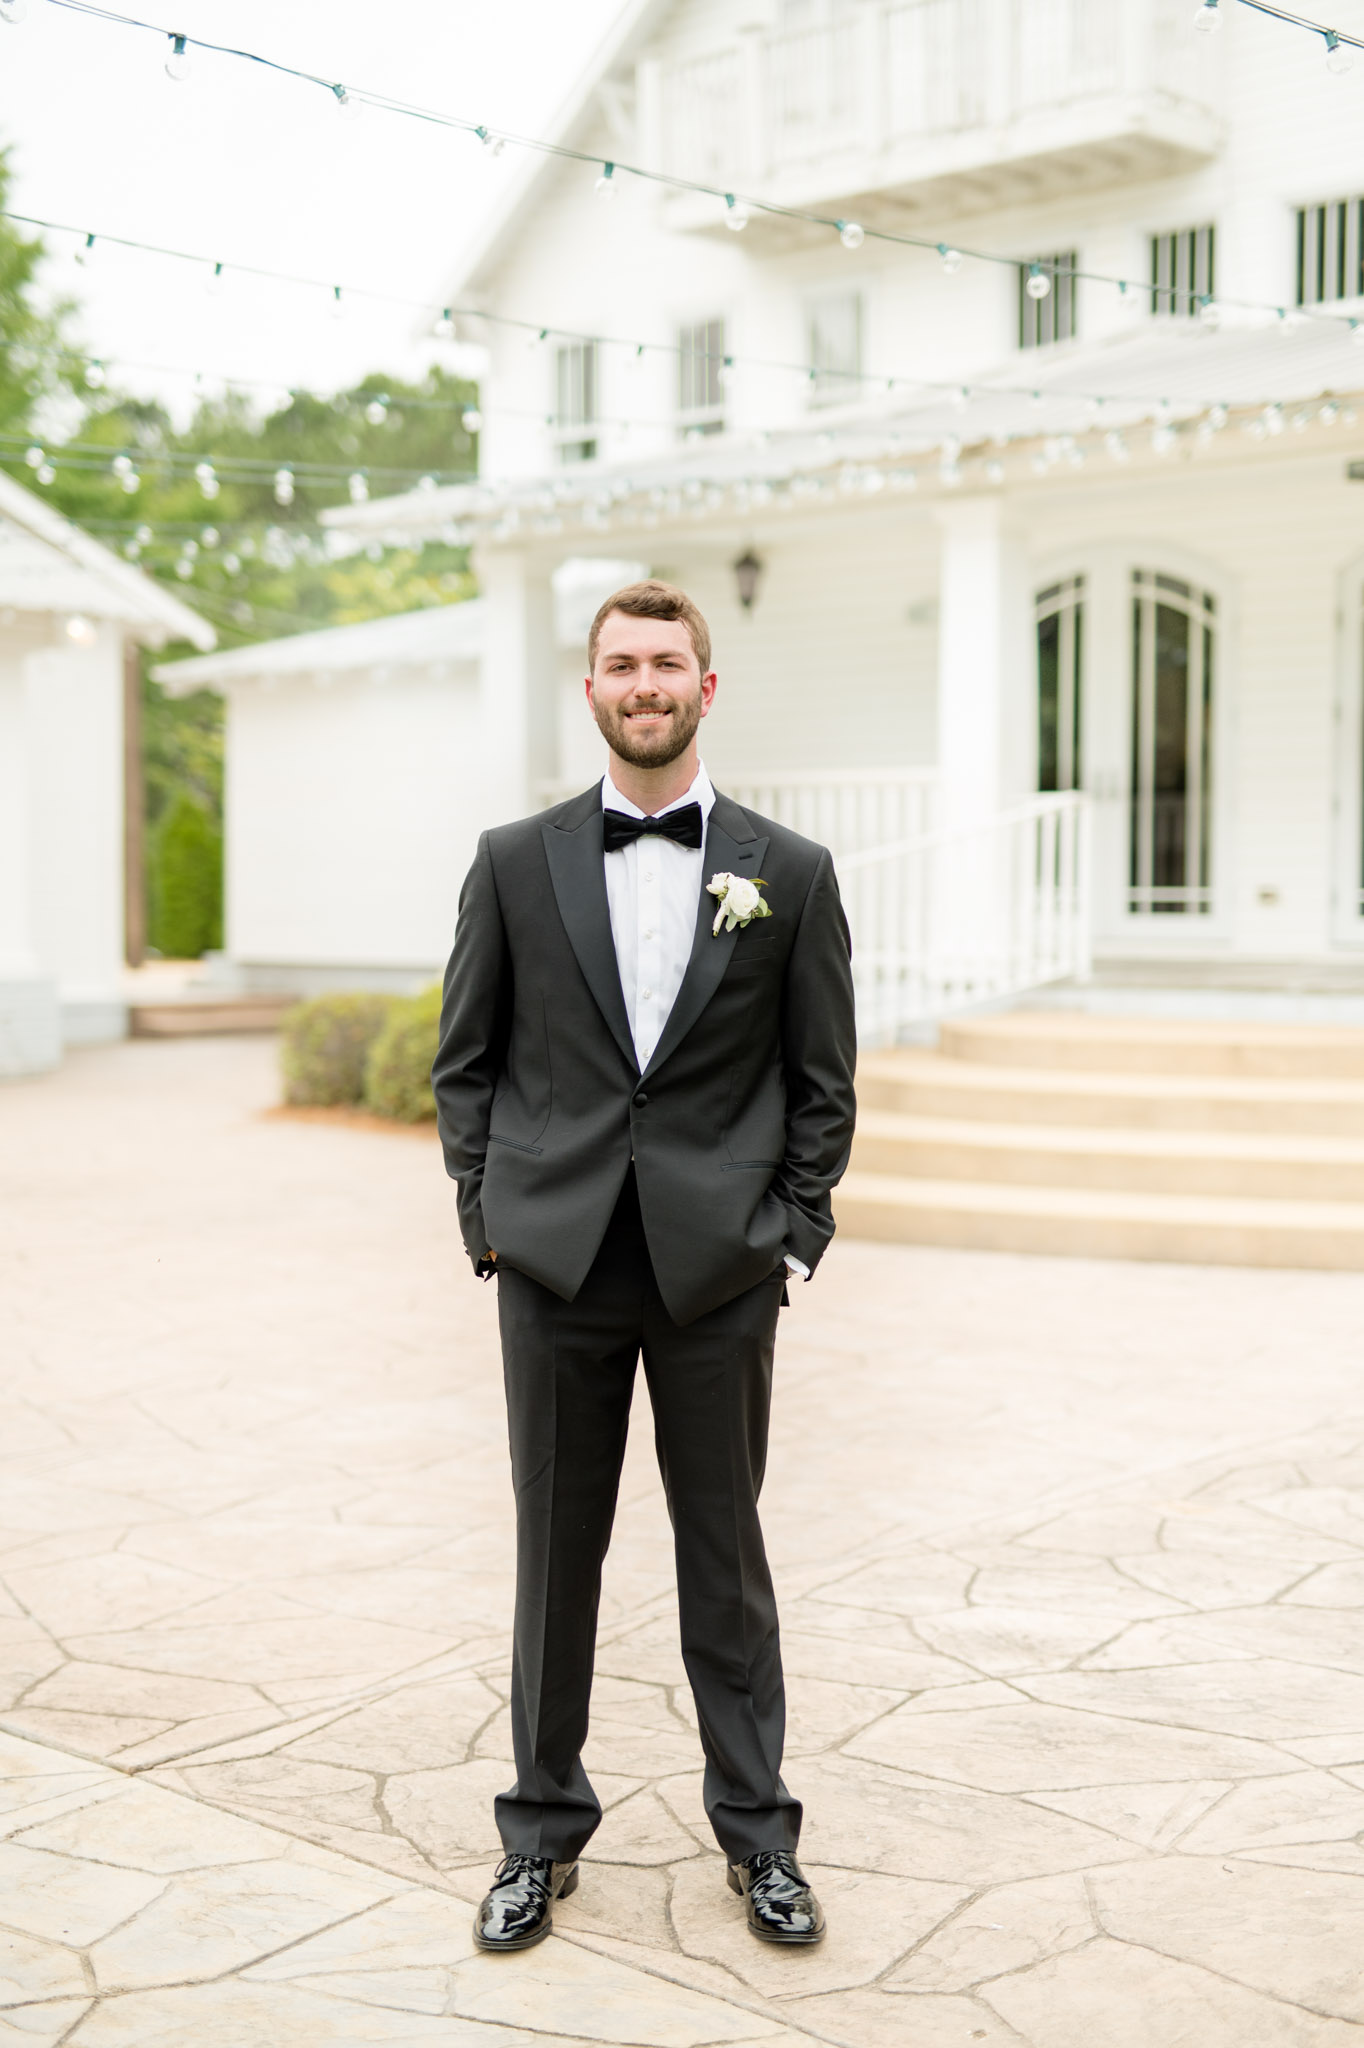 Groom stands and smiles at camera.